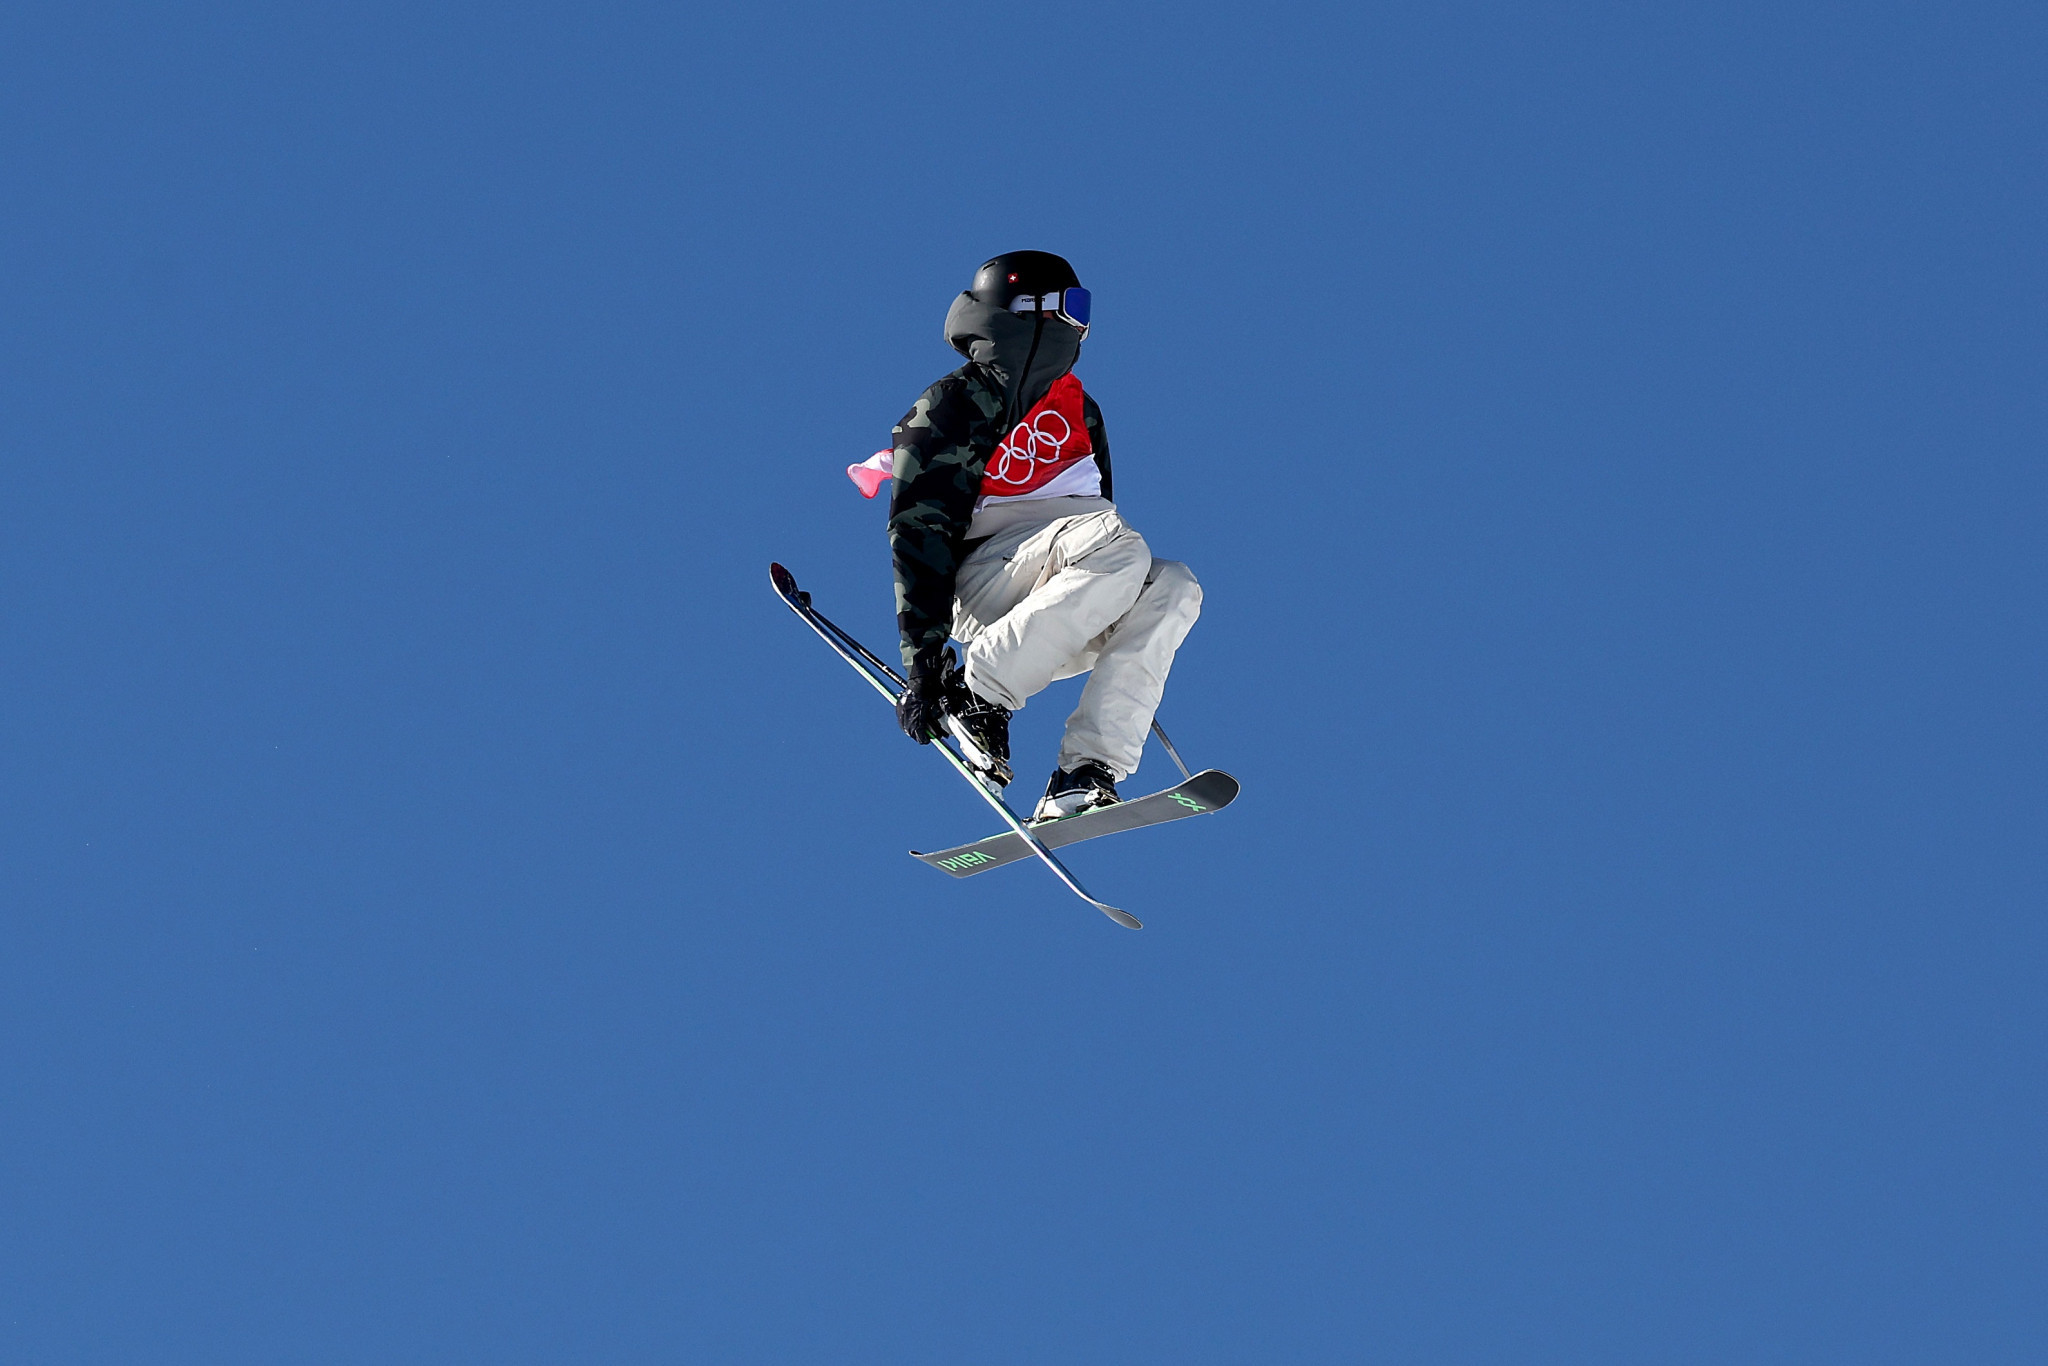 Ragettli heads Swiss one-two-three and Oldham wins at slopestyle World Cup in Bakuriani